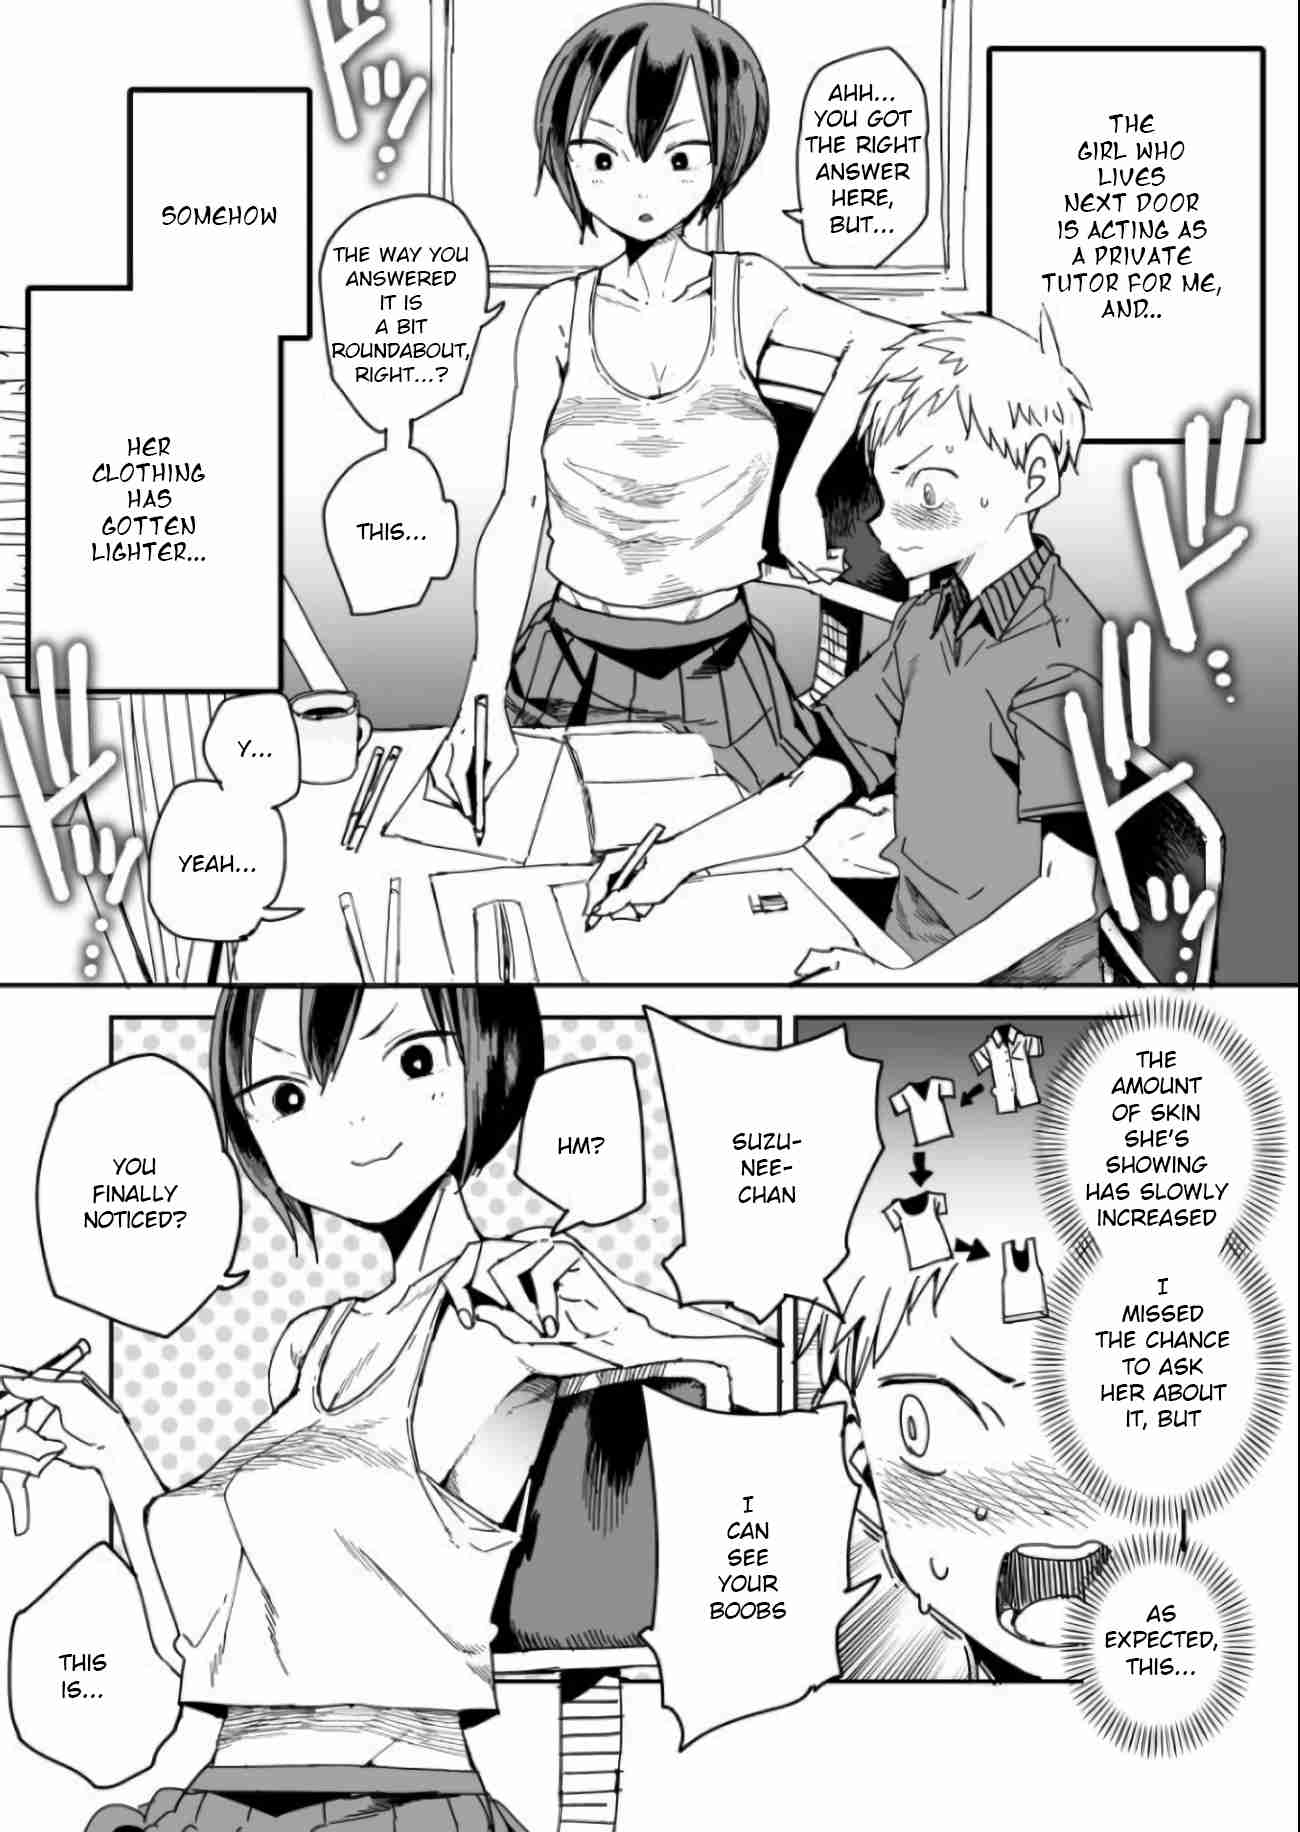 Oshimai Vol. 1 Ch. 15 The High School Private Tutor is Dressed Lightly